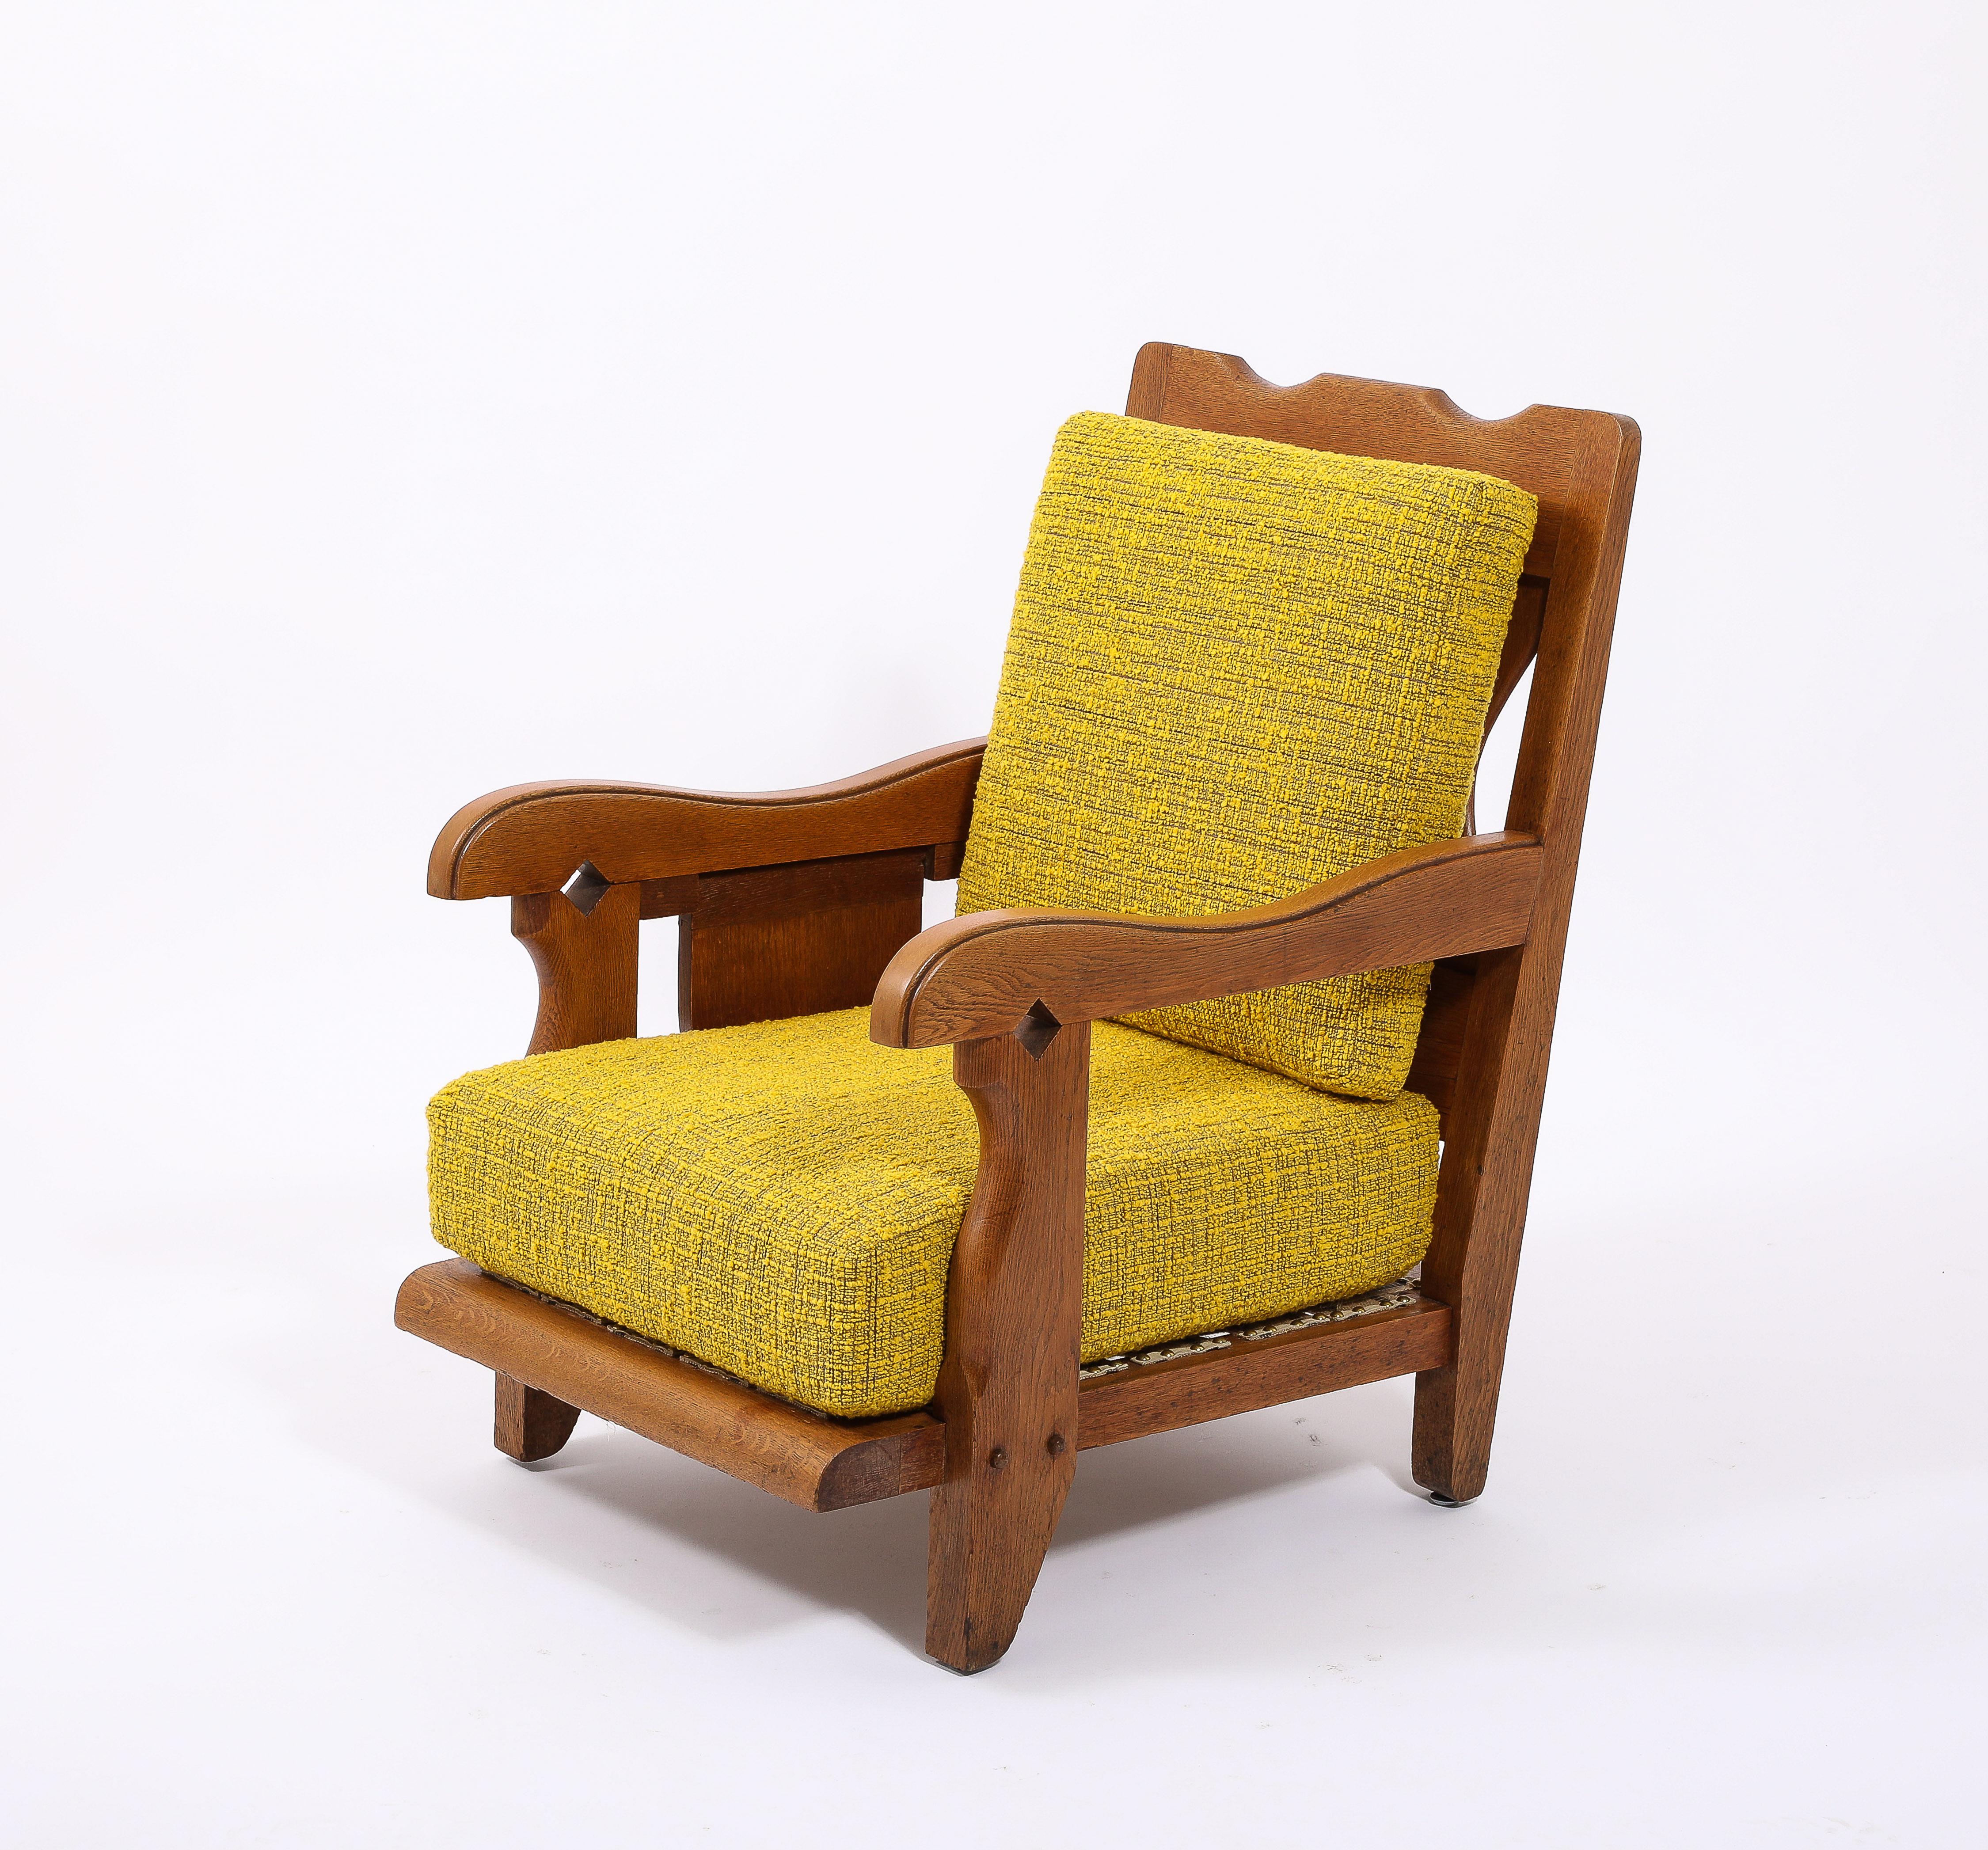 Large Oak & Yellow Wool Armchair with side Shelf, France 1950's For Sale 6